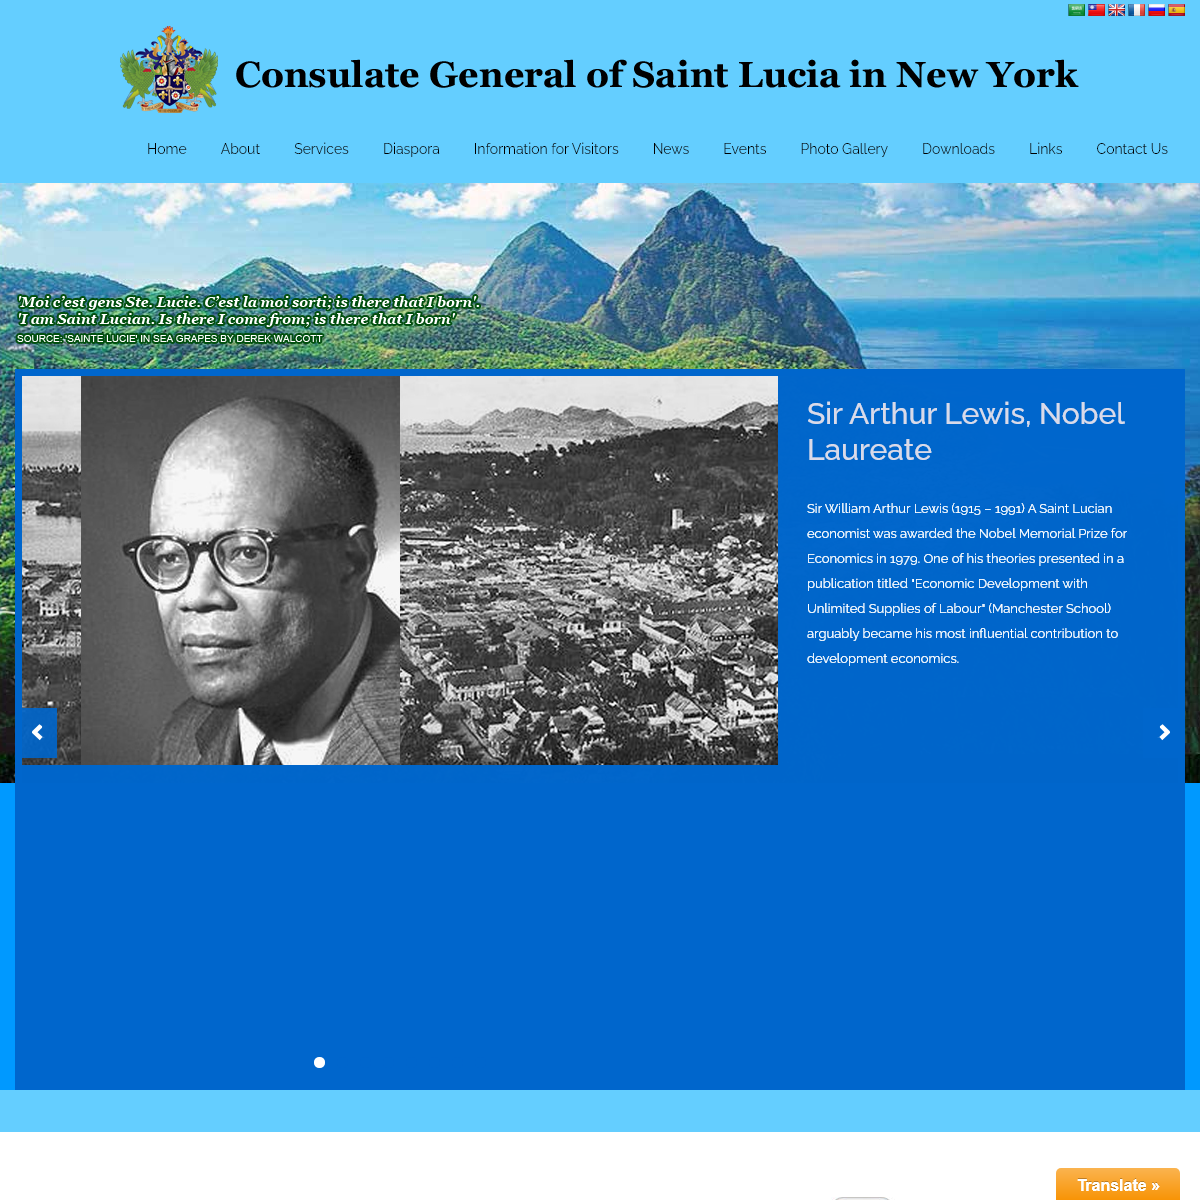 A complete backup of saintluciaconsulateny.org